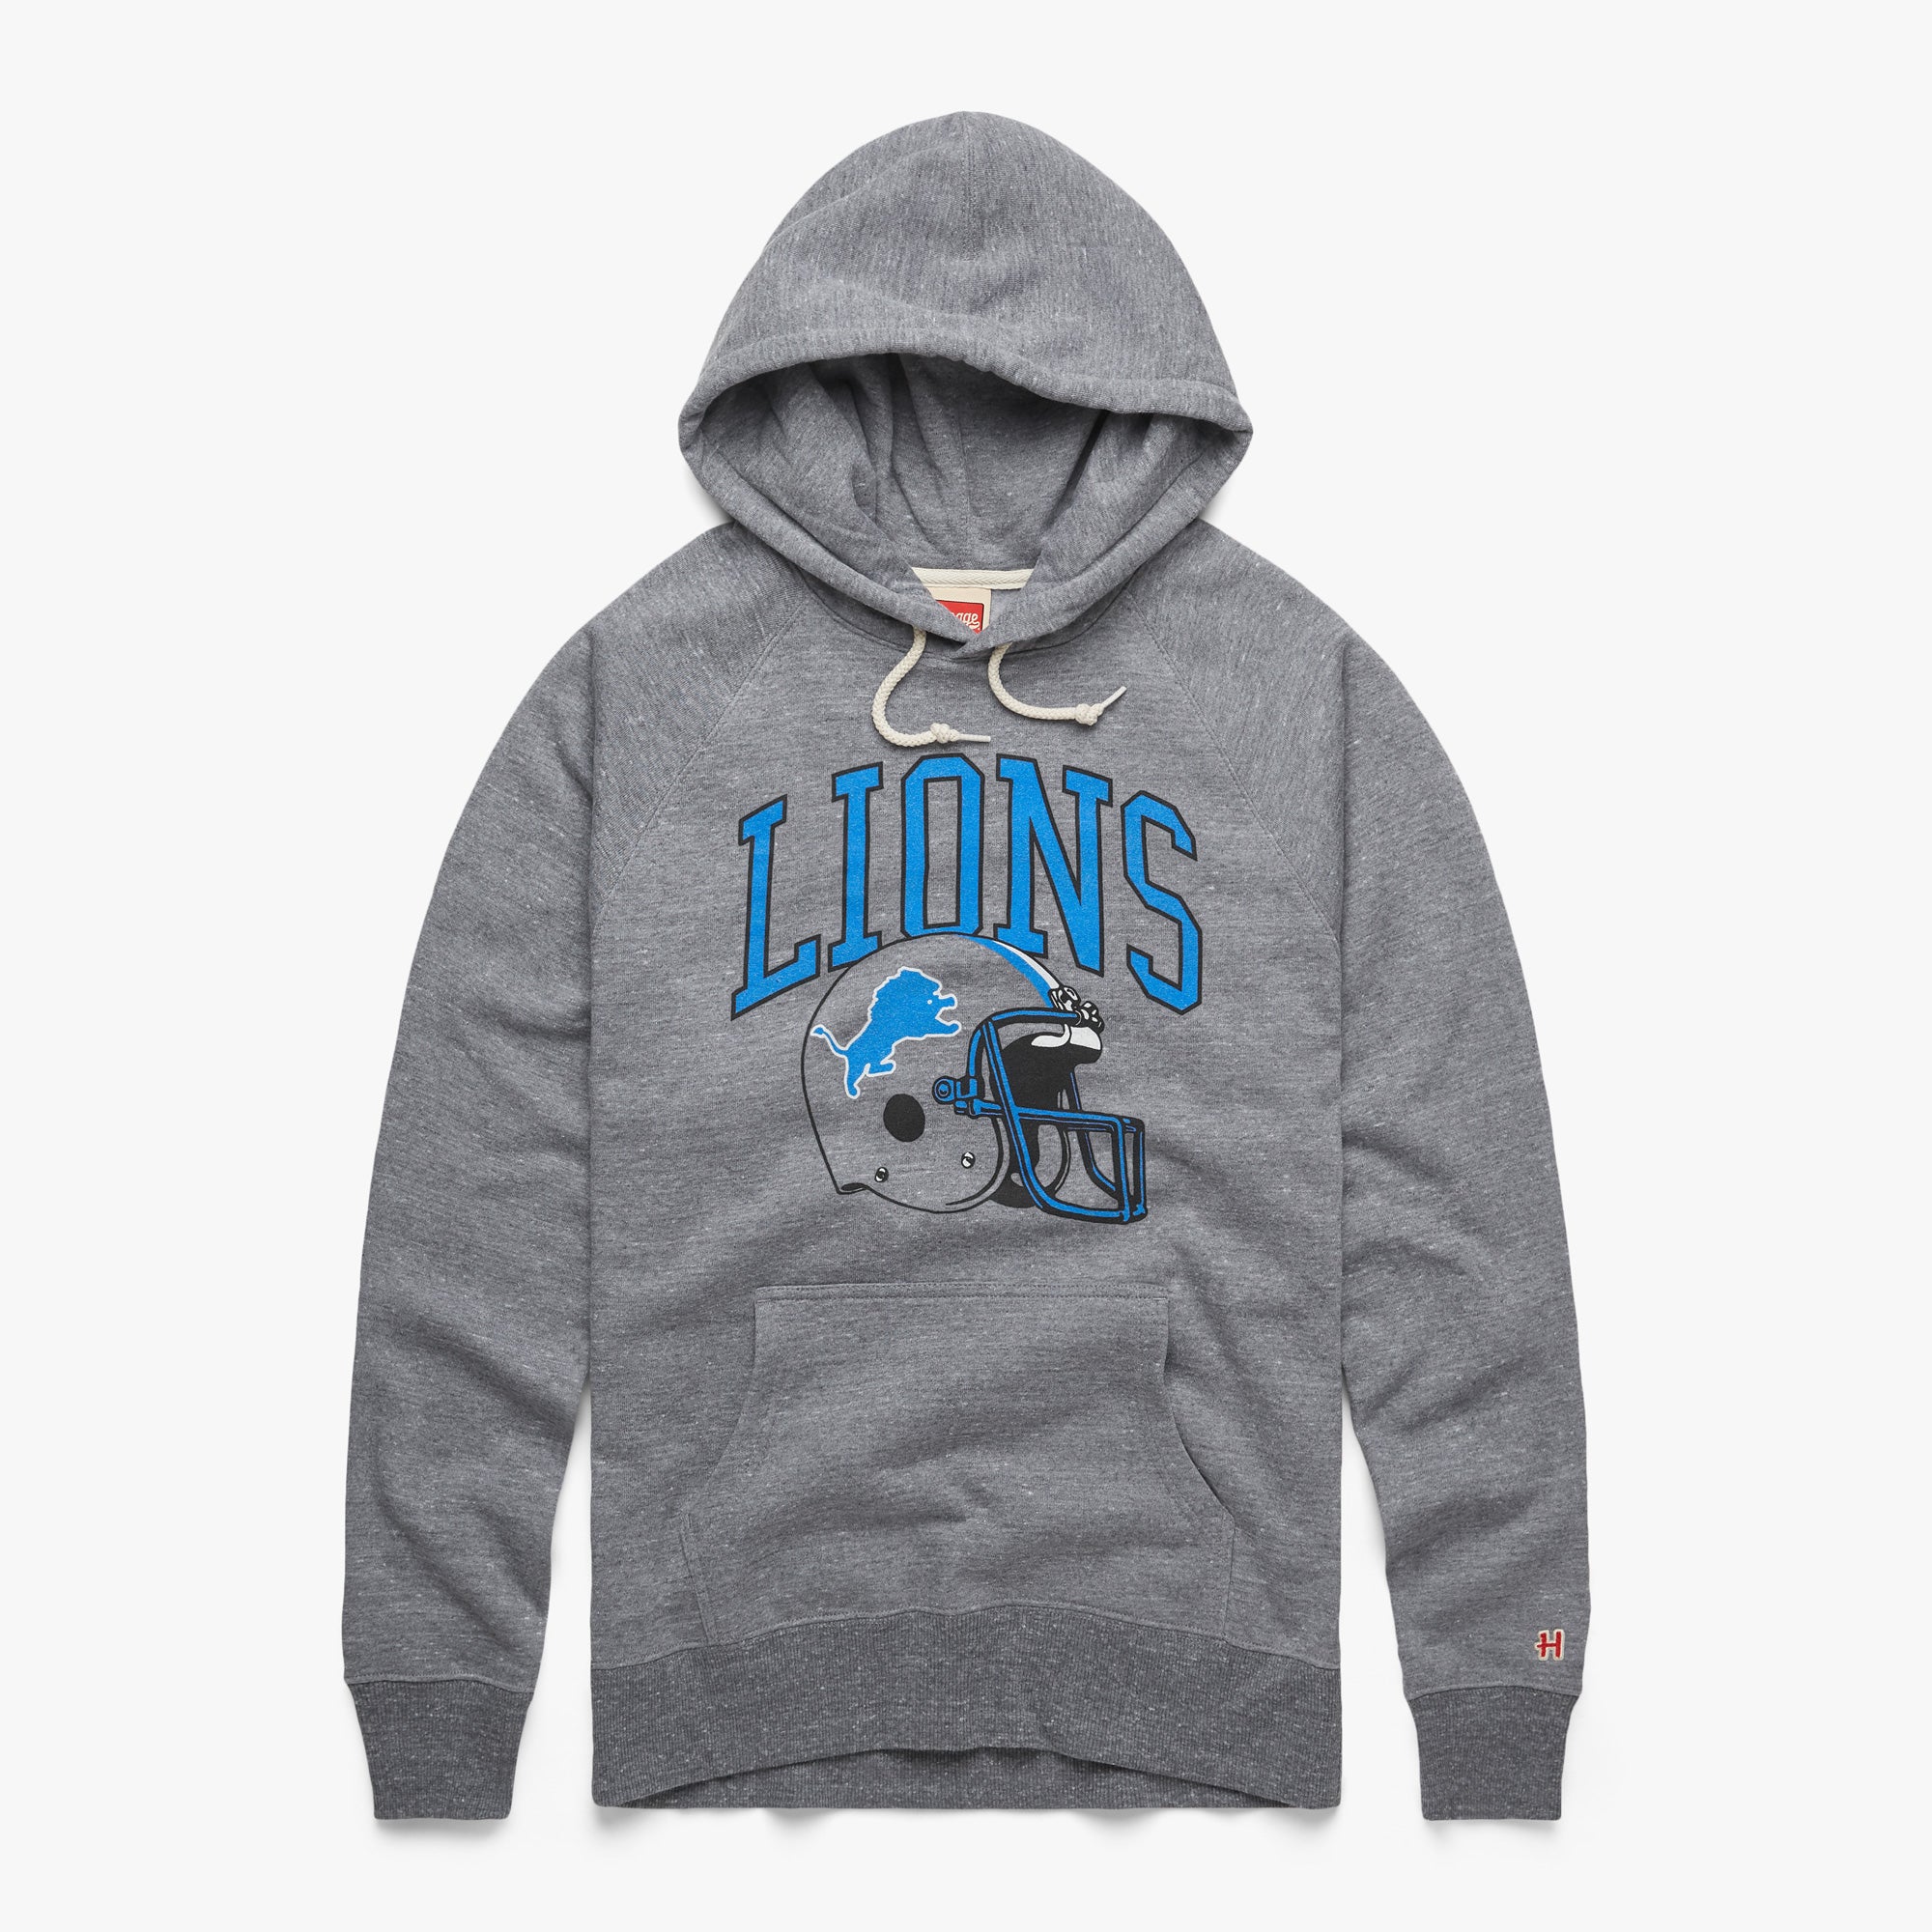 Detroit Lions Helmet Retro Hoodie from Homage. | Officially Licensed Vintage NFL Apparel from Homage Pro Shop.